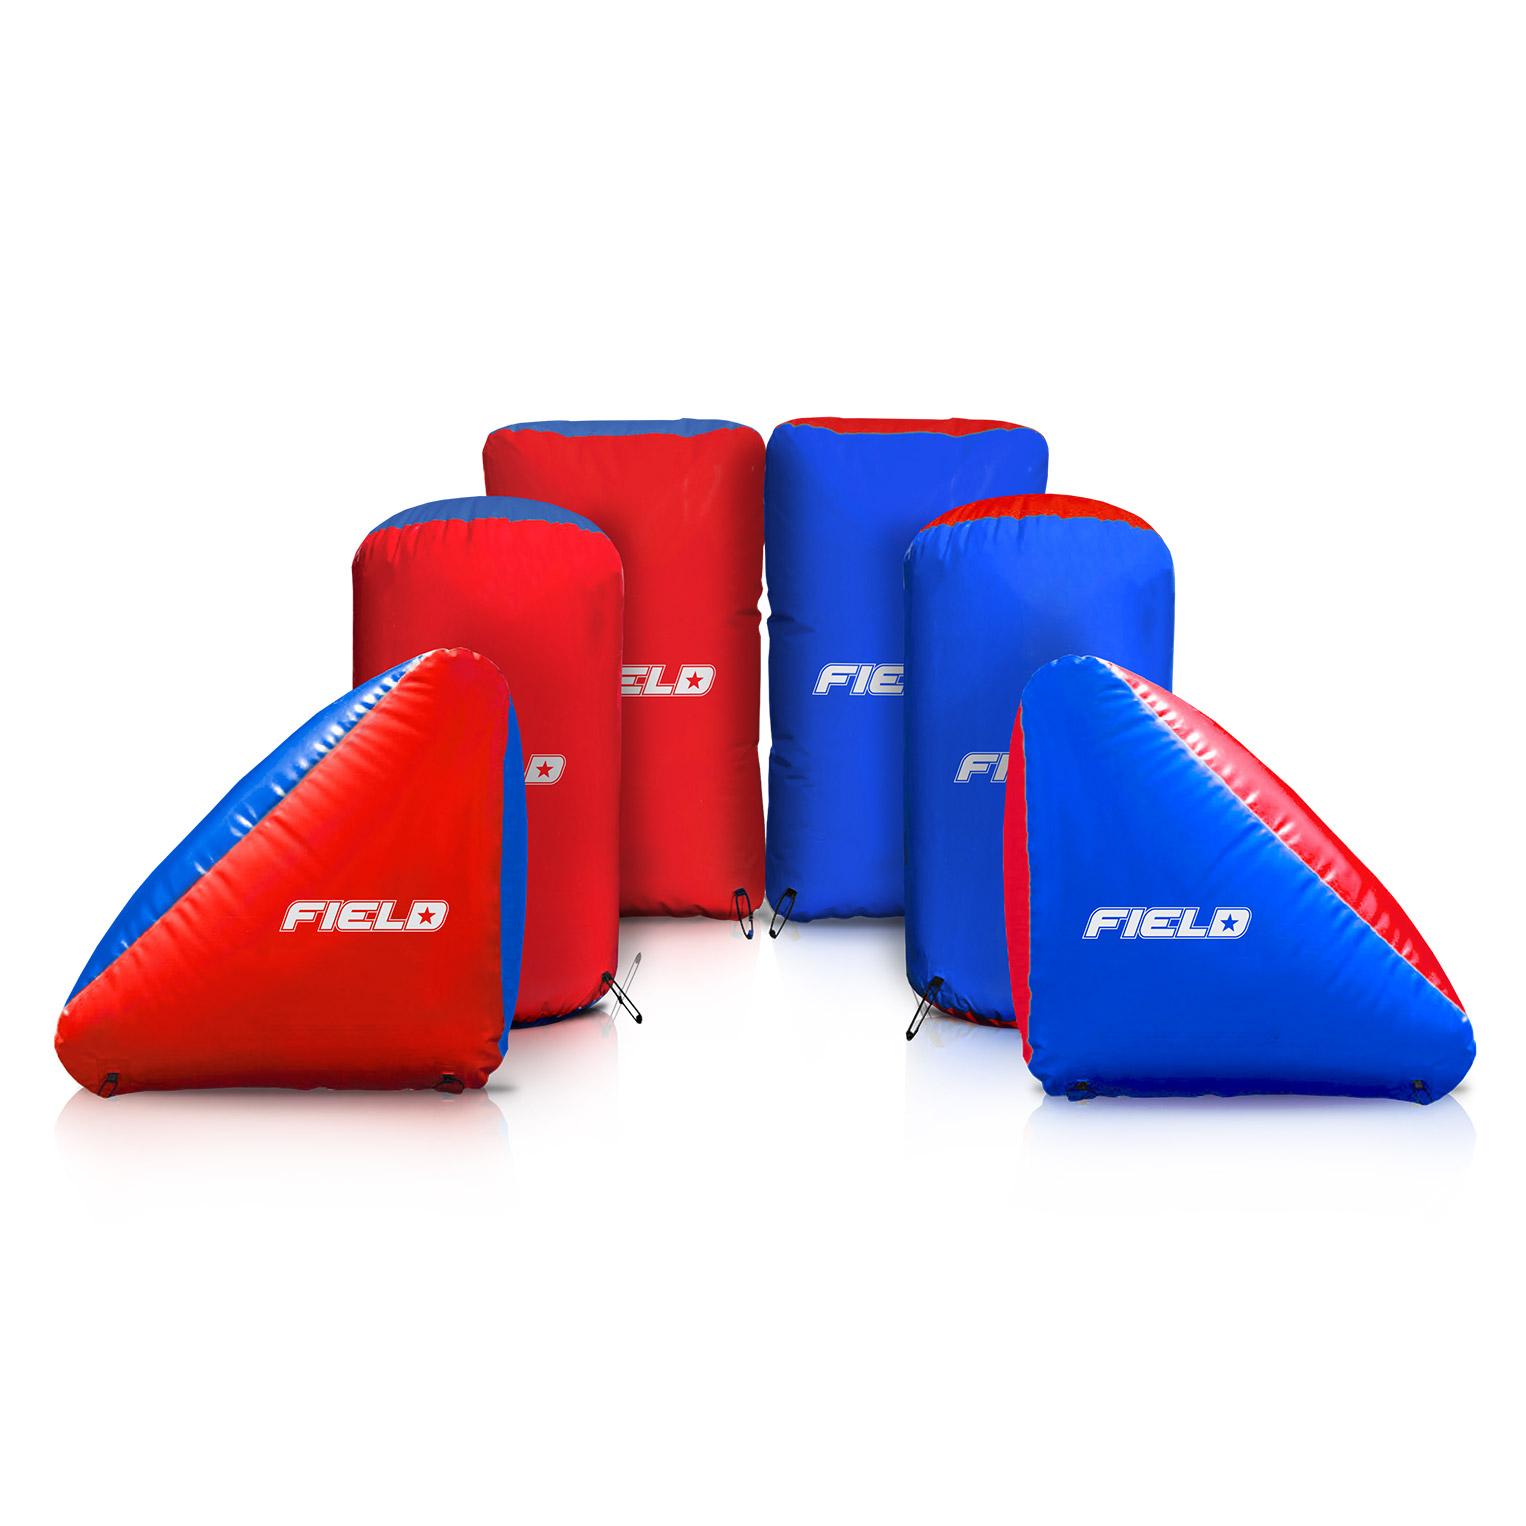 Field Low Impact Inflatable Bunkers Set of 6 Un Red/Blue